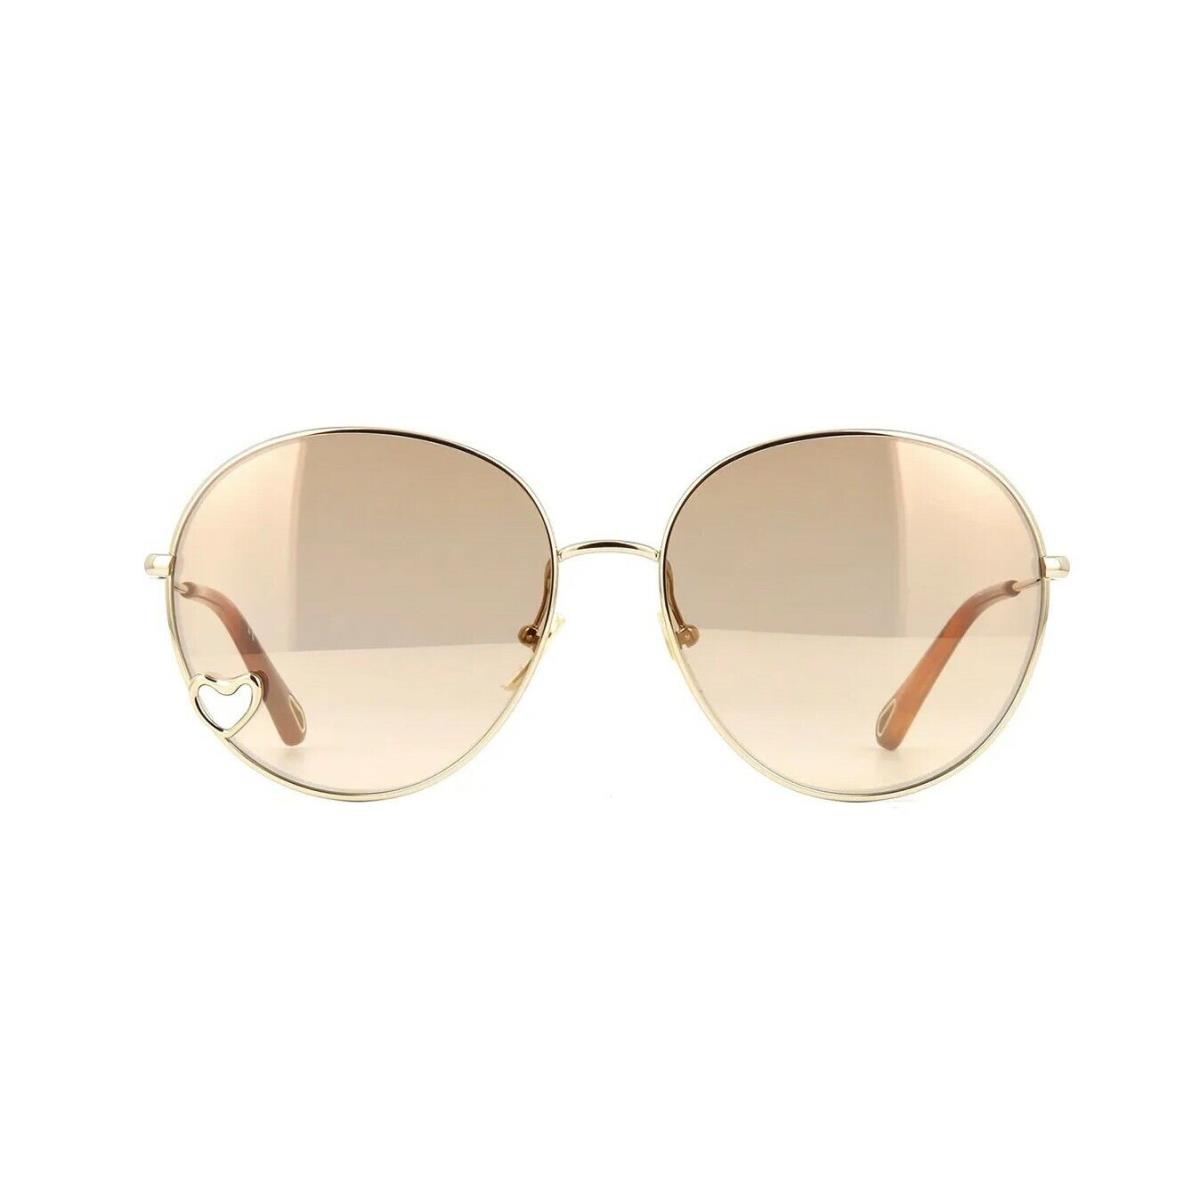 Chloe Ahim E CH0027S Gold/brown with Light Gold Mirroried 006 Sunglasses